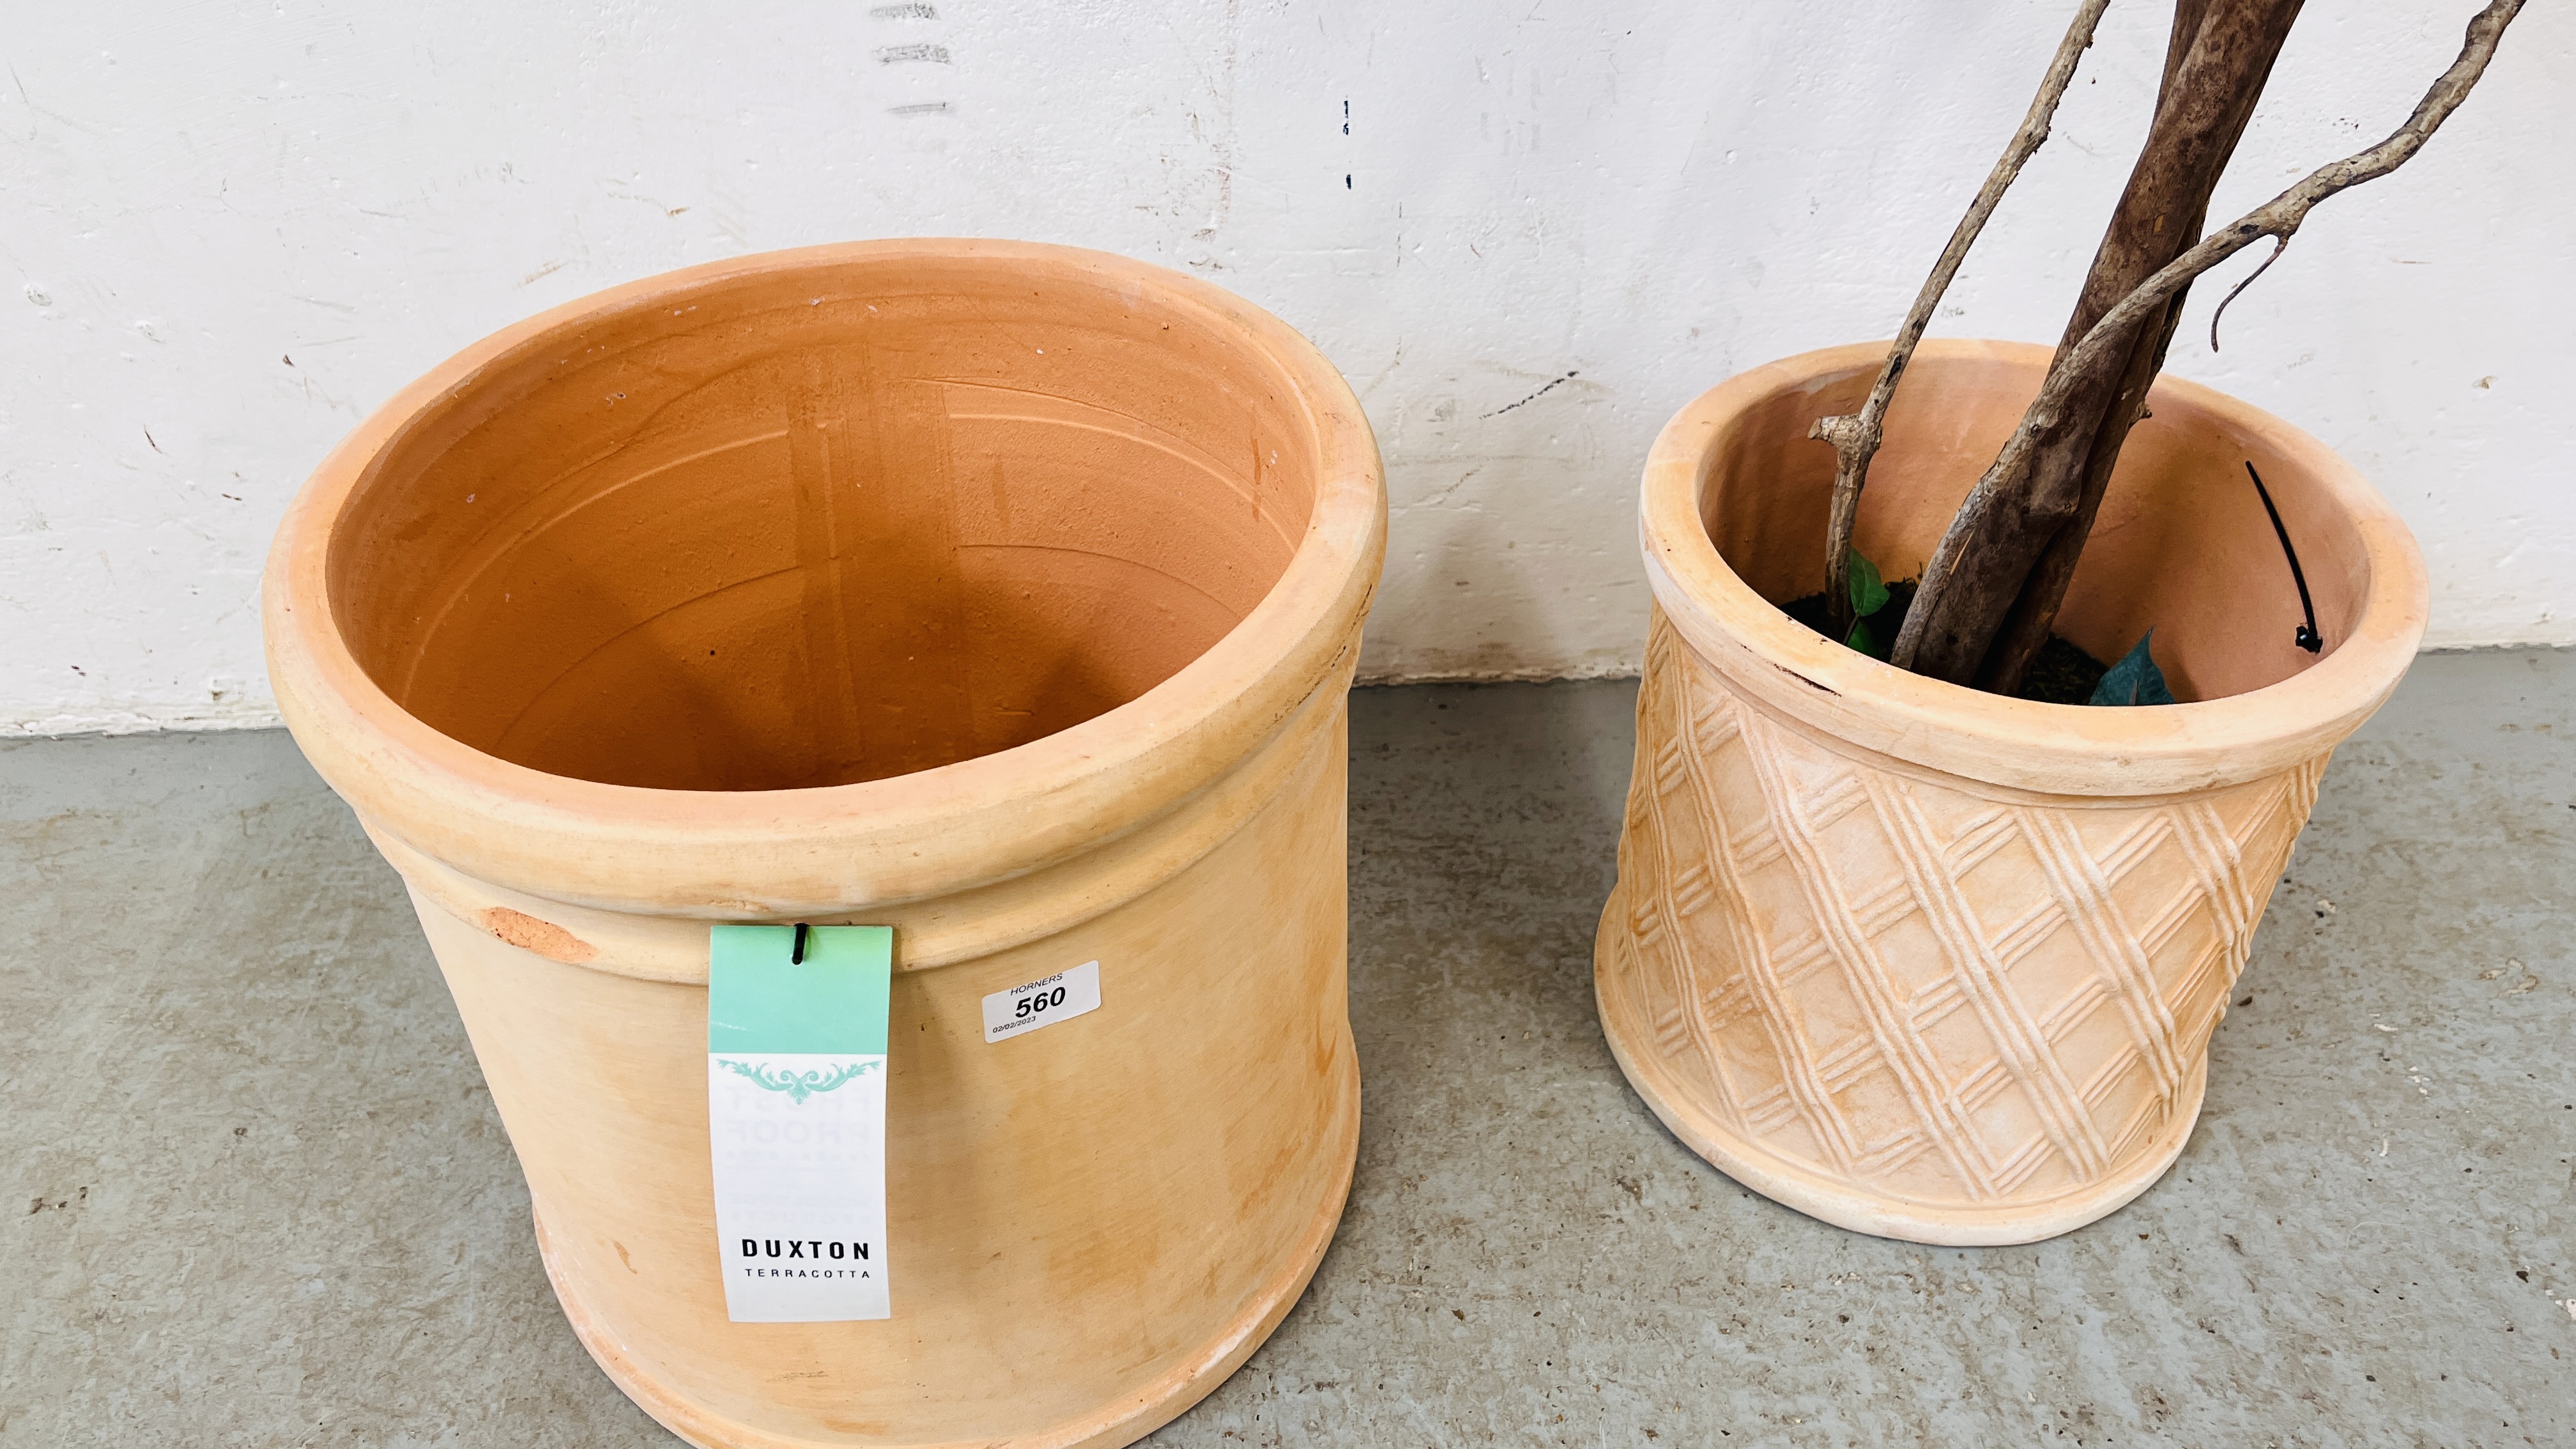 2 LARGE TERRACOTTA PLANT POTS INCLUDE DAXTON AND ARTIFICIAL TREE (THE LARGEST POT - DIAMETER 36CM) - Image 4 of 4